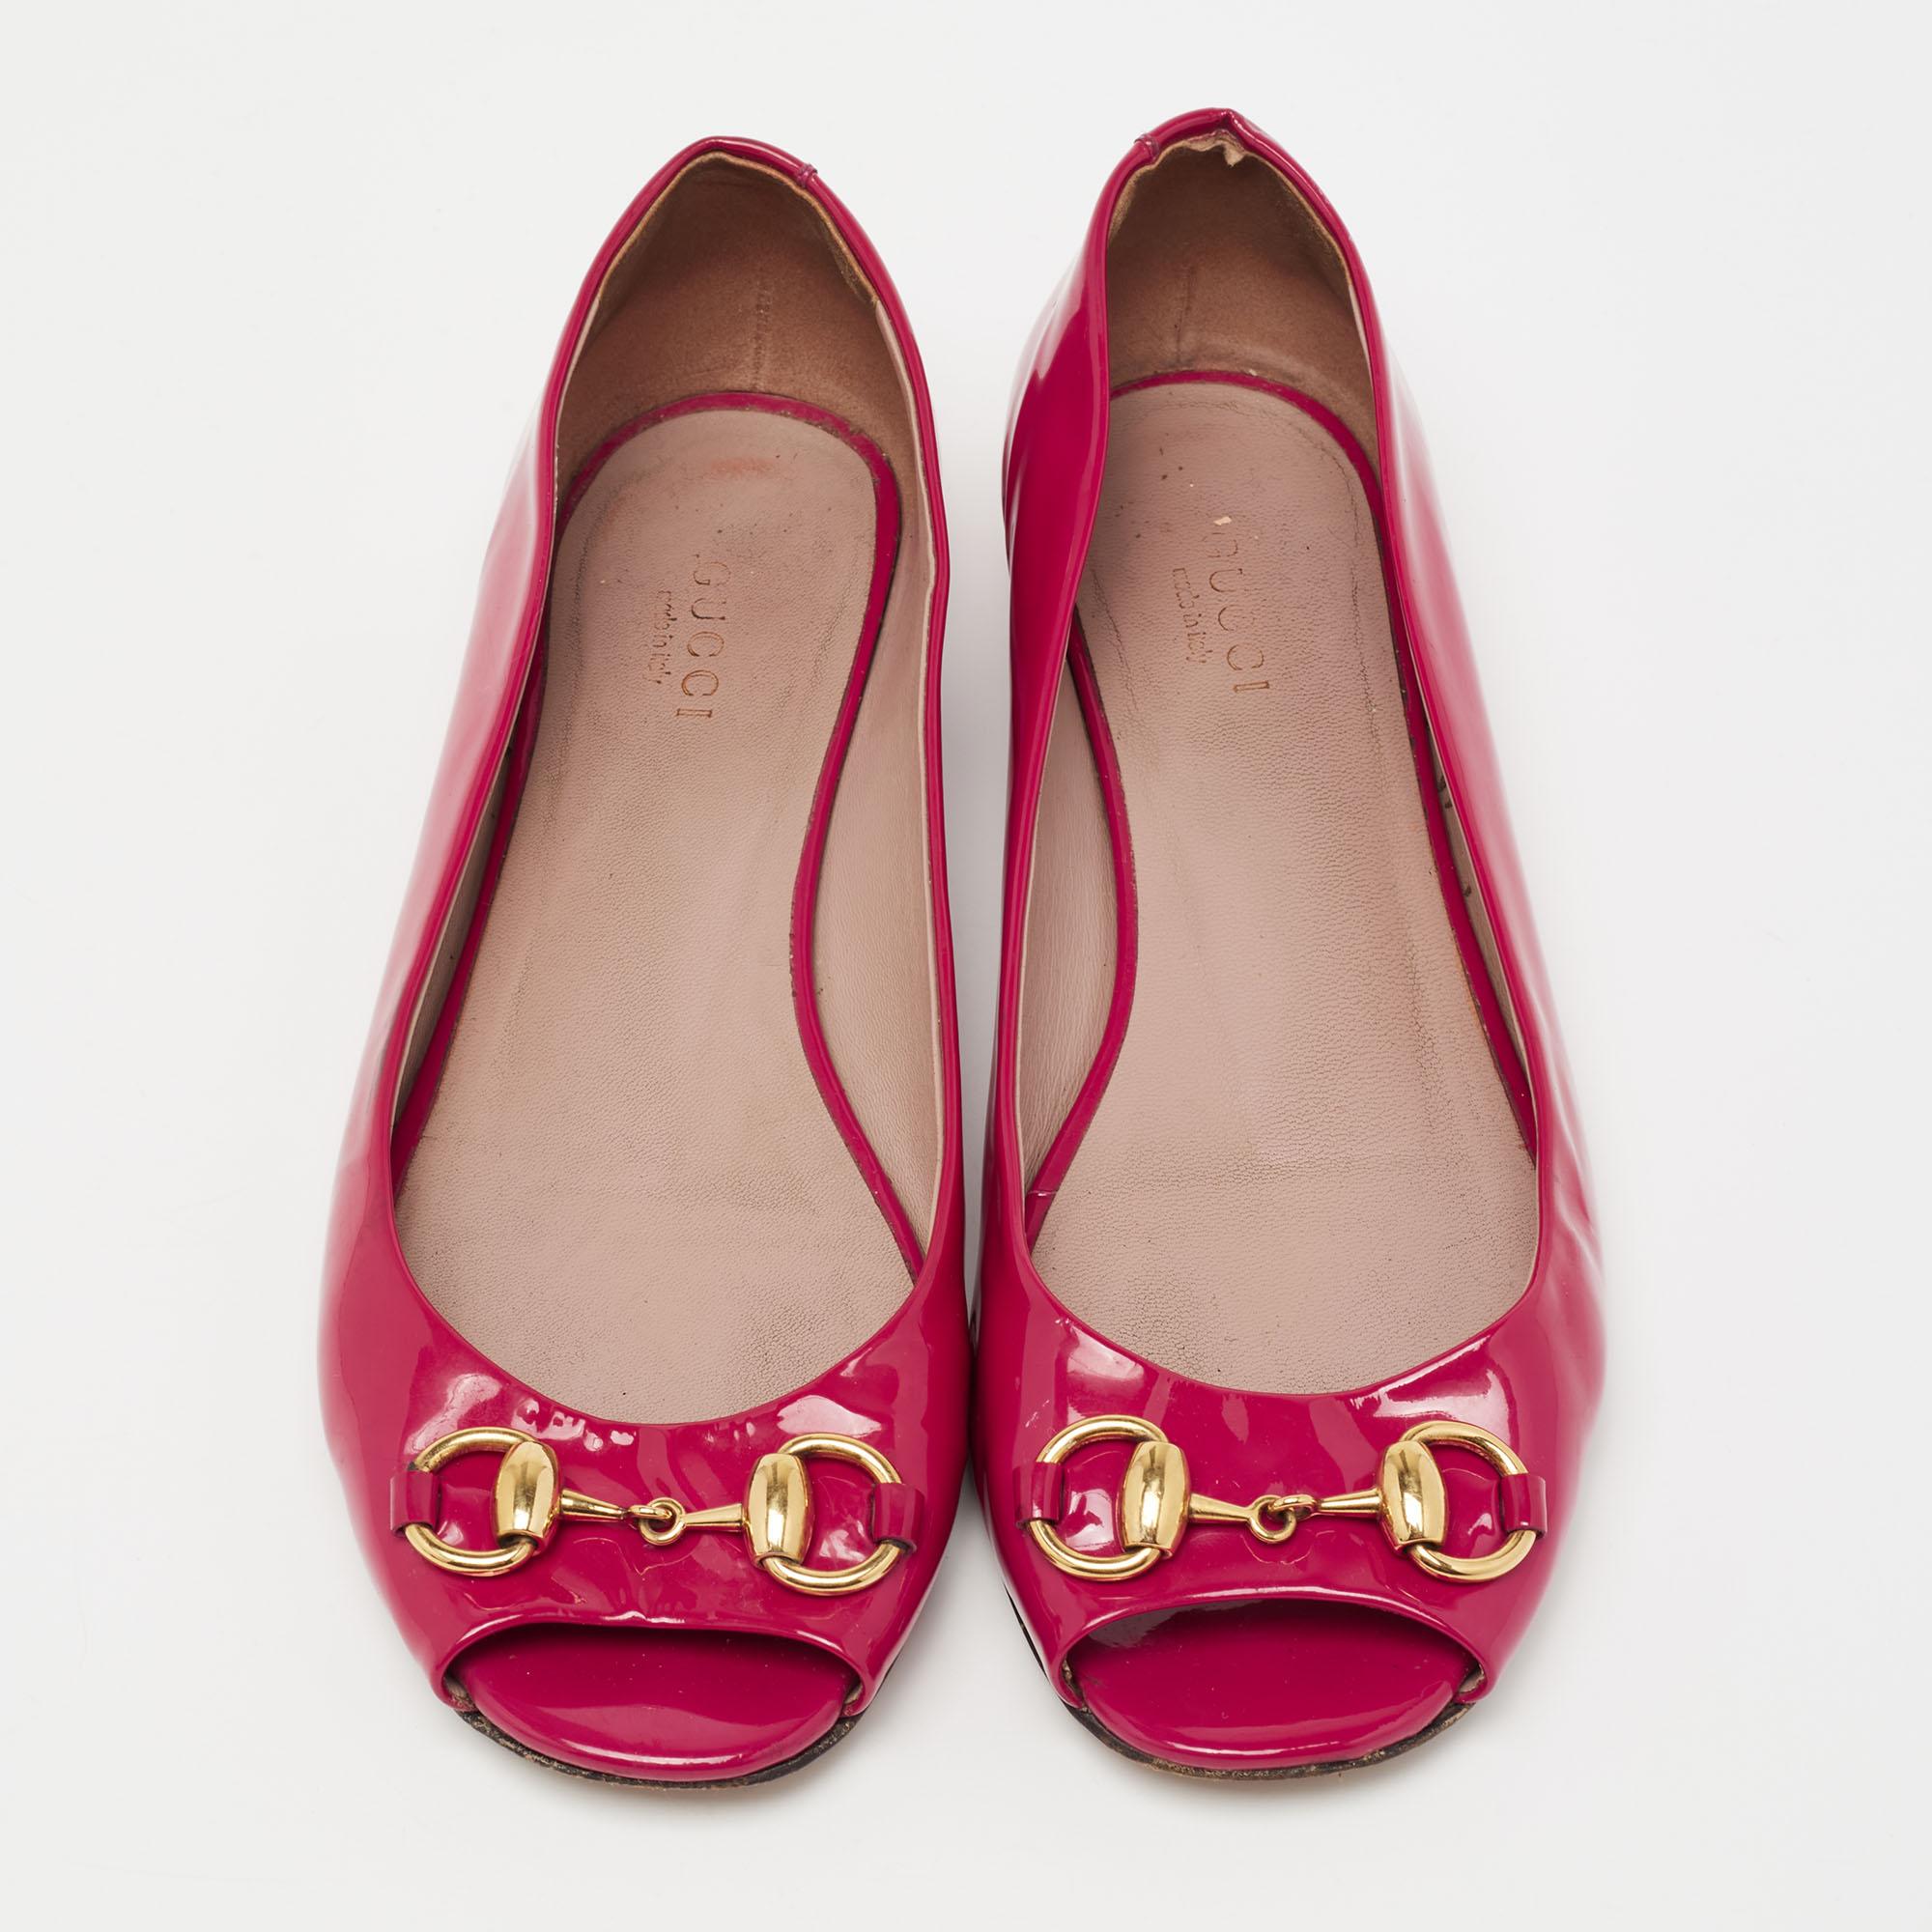 The sculptural silhouette of these Gucci ballet flats gets a signature update with the Horsebit motif on the open toes. Created from patent leather, they exhibit a slip-on fitting, gold-tone hardware, and low heels.

